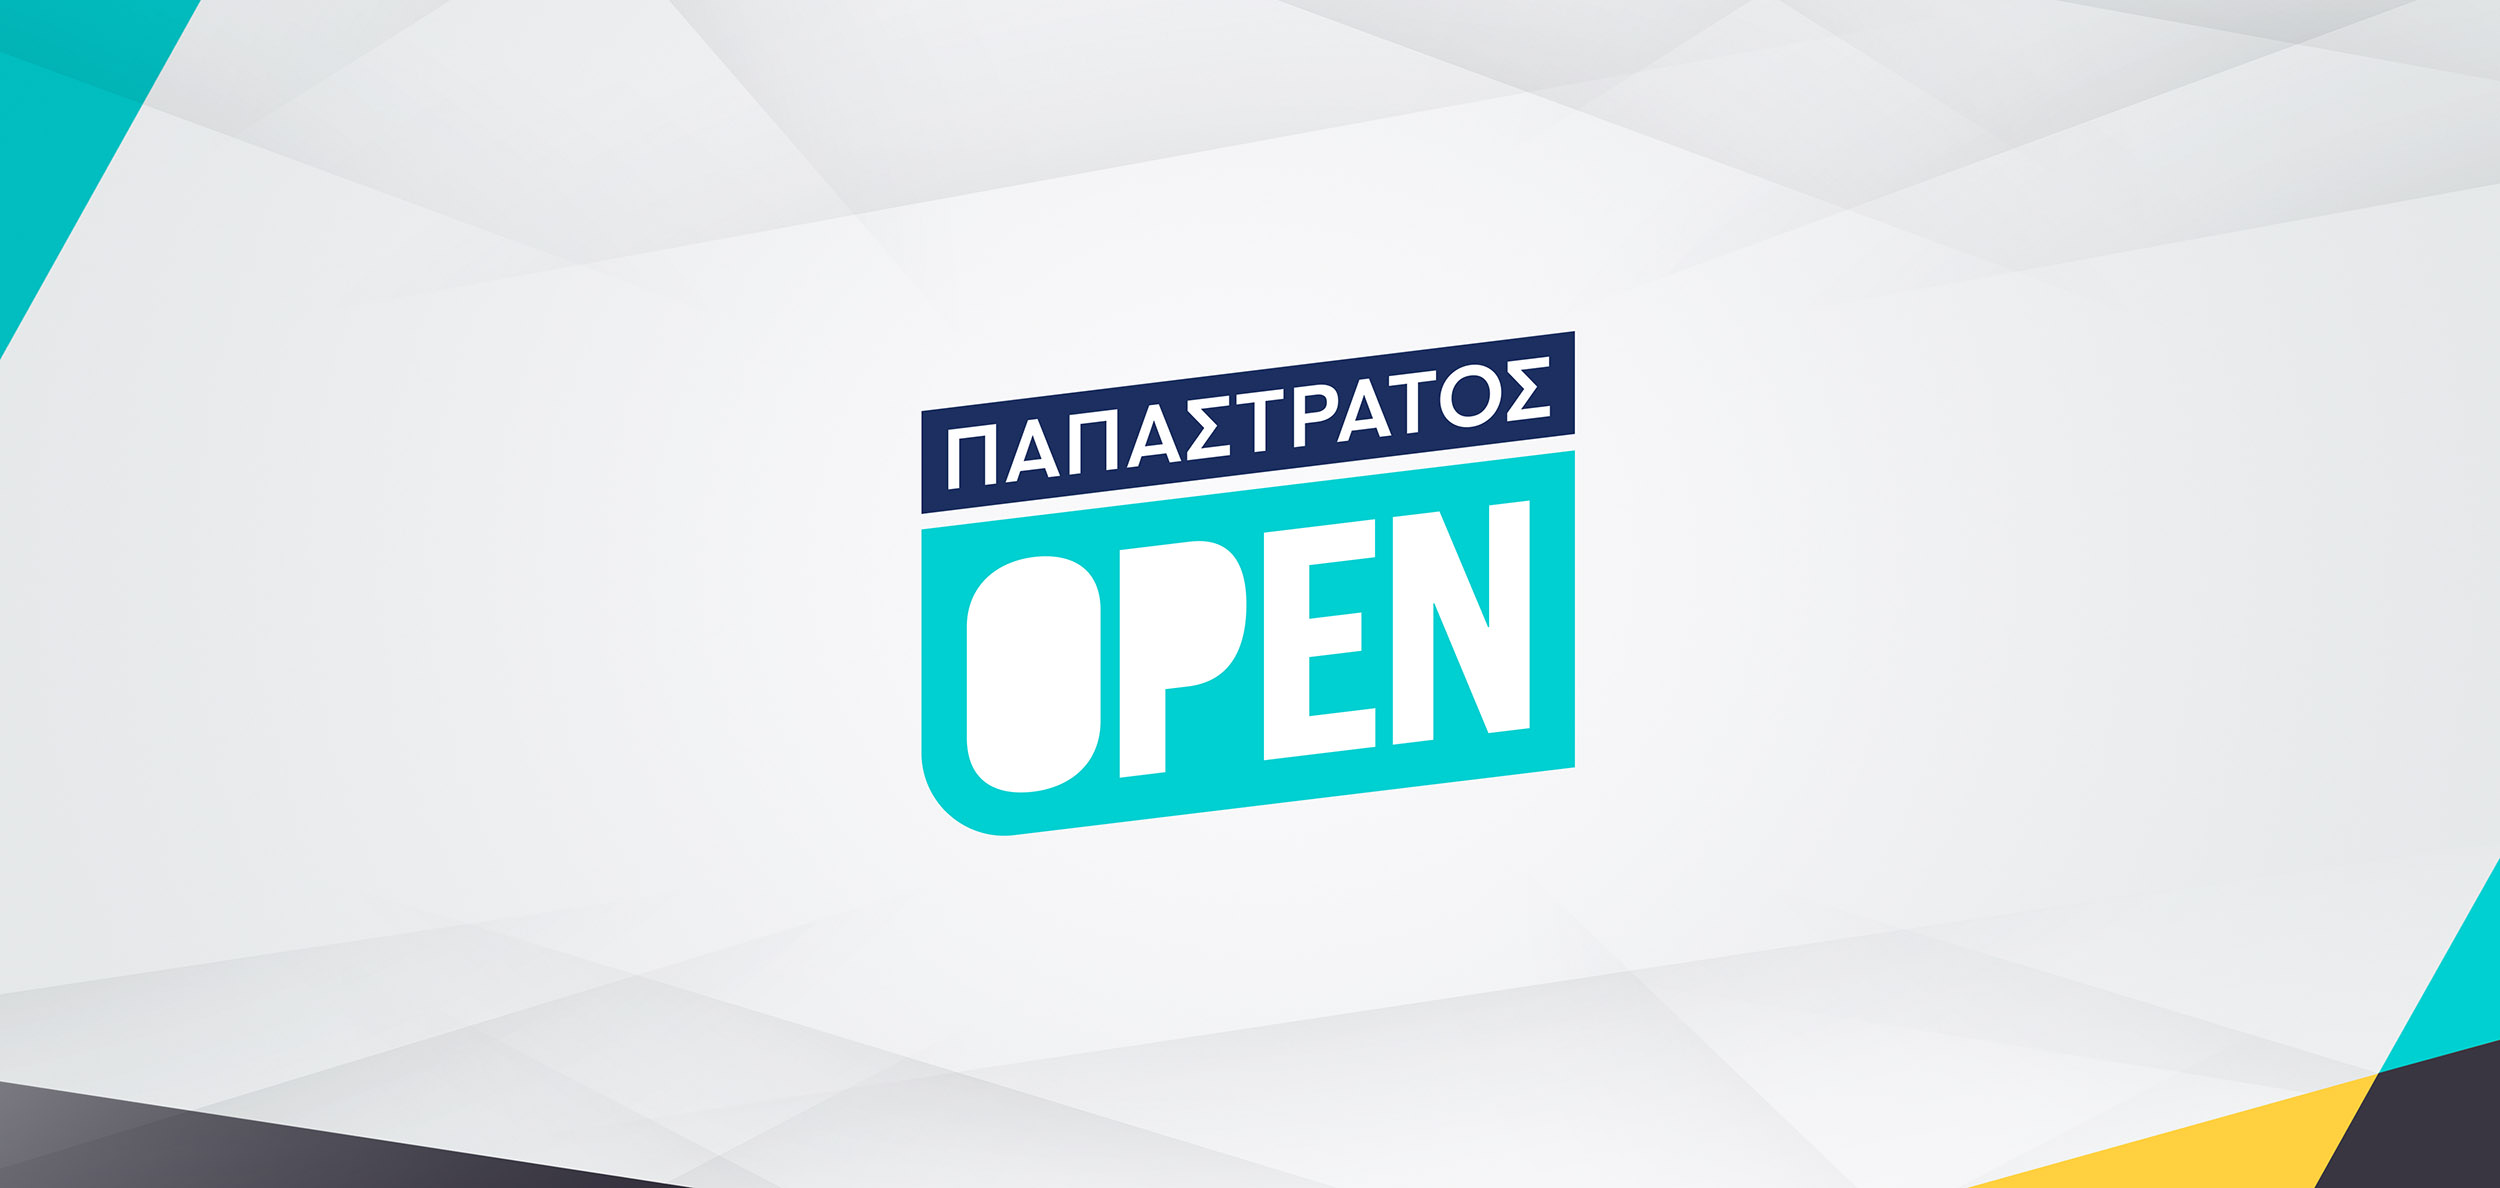 Papastratos Open Outter Image